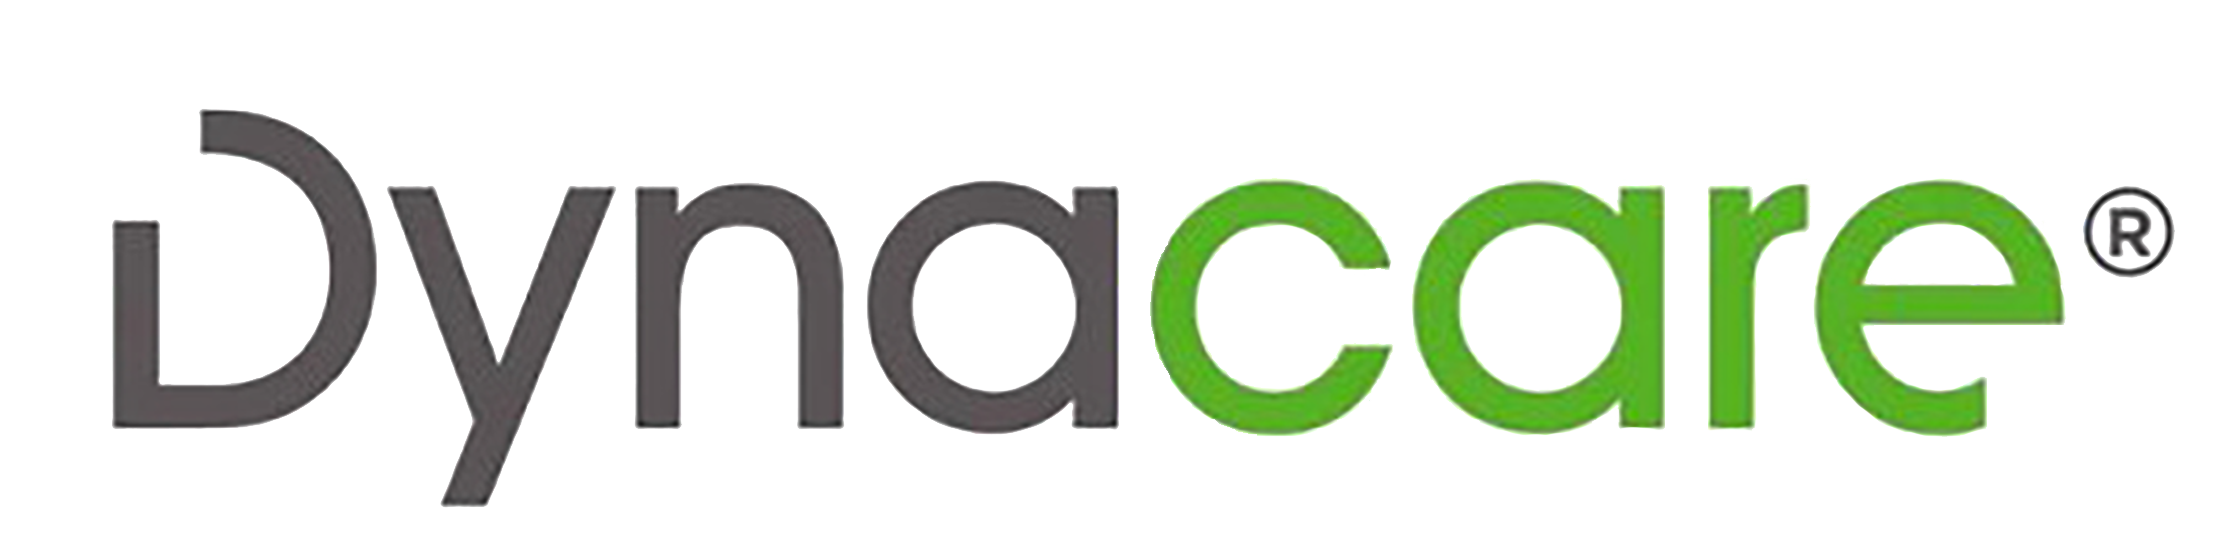 Dynacare_logo.png